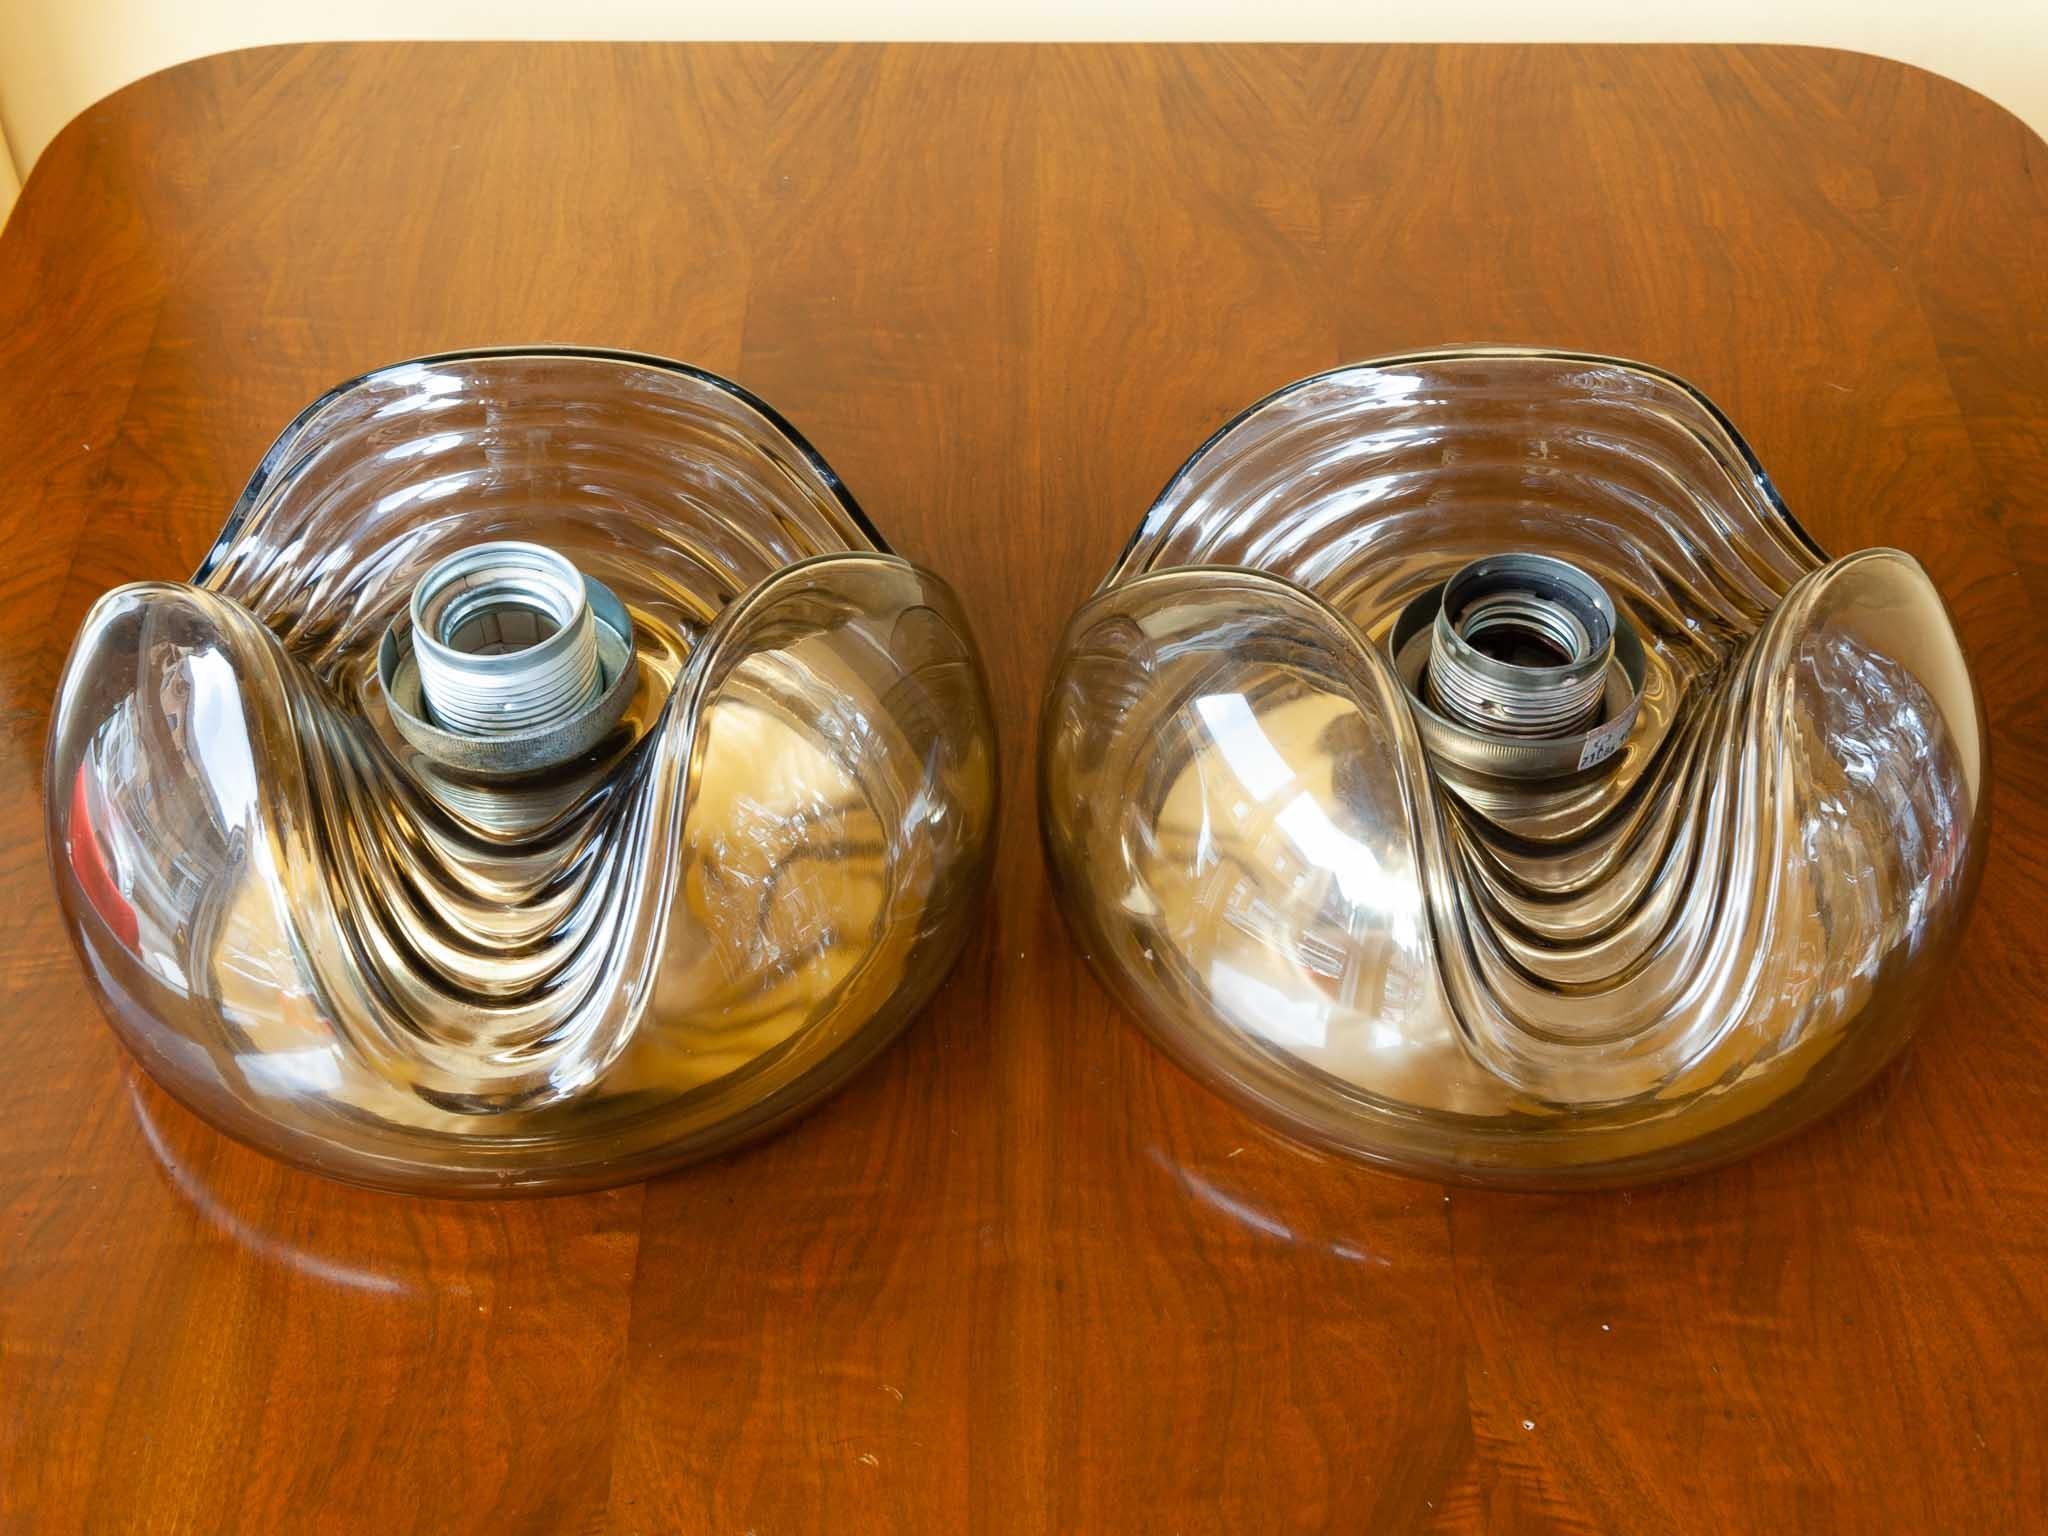 1970s 'Wave' smoked colored glass with a gold reflective base plate flush mount wall lights or sconces or ceiling mount lights designed by Koch and Lowy for Peill & Putzler Germany. A very Space Age futuristic look.

Sold as a pair available but